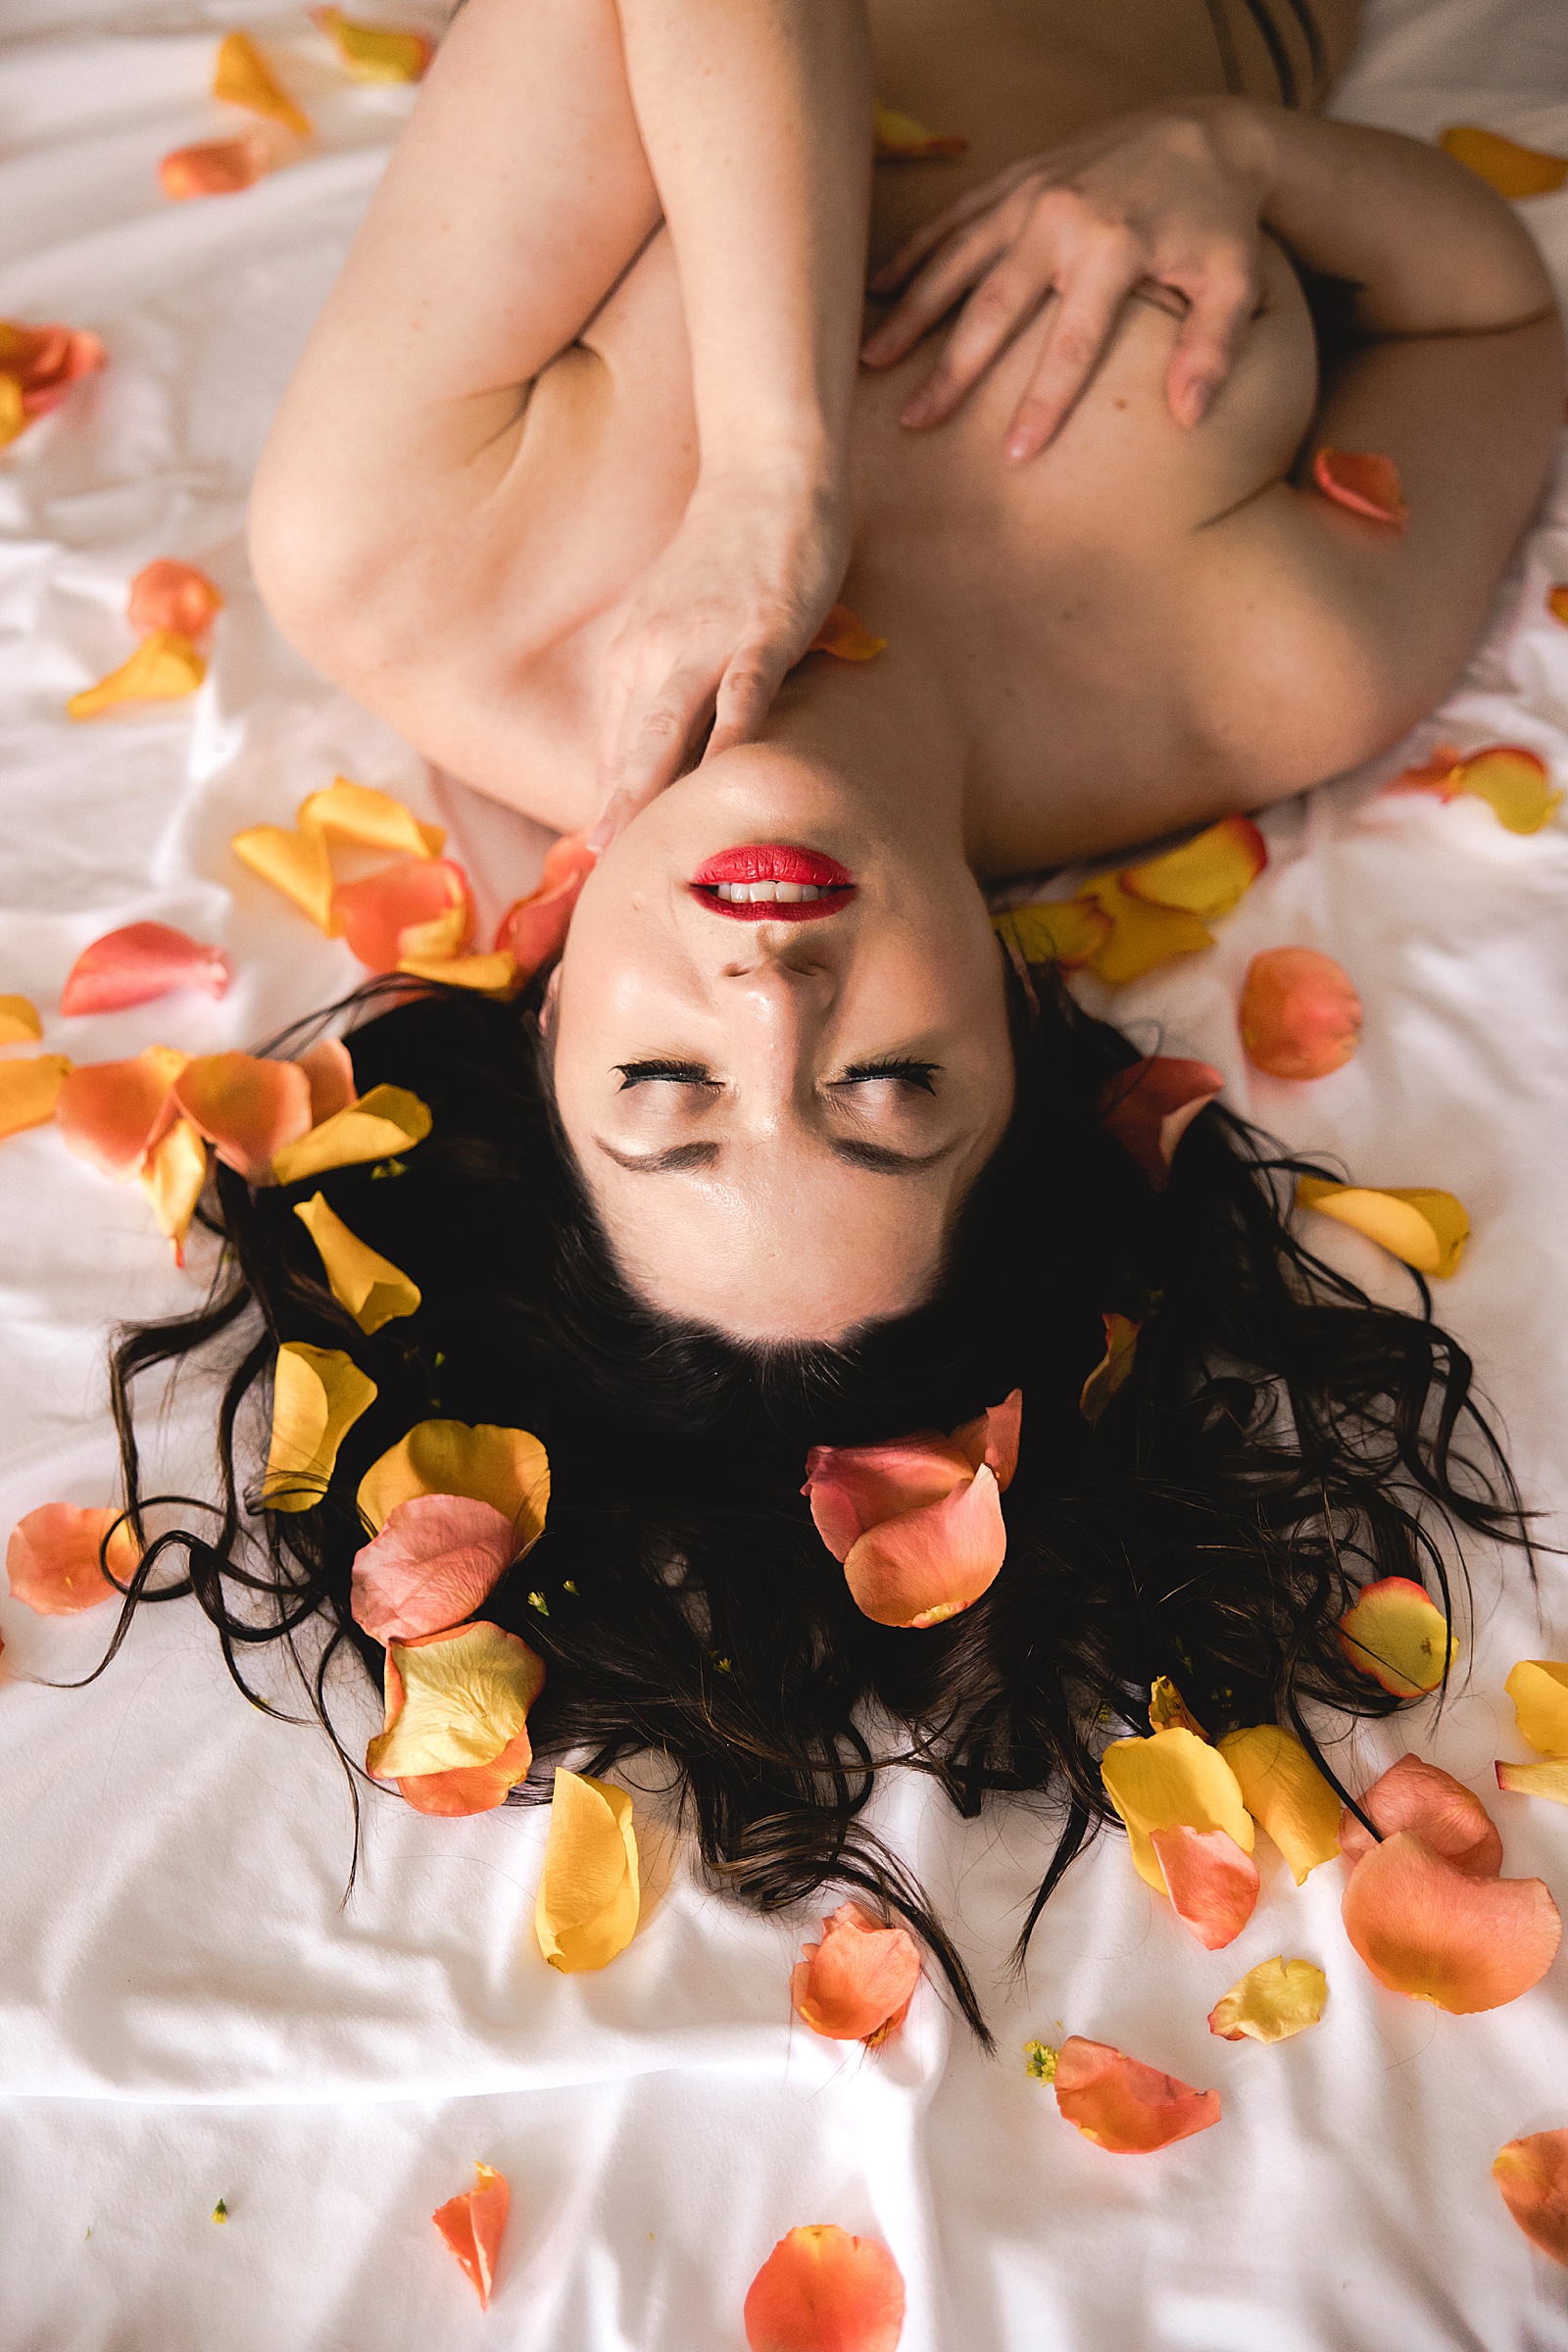 Topless woman on a bed with flower petals all around her 